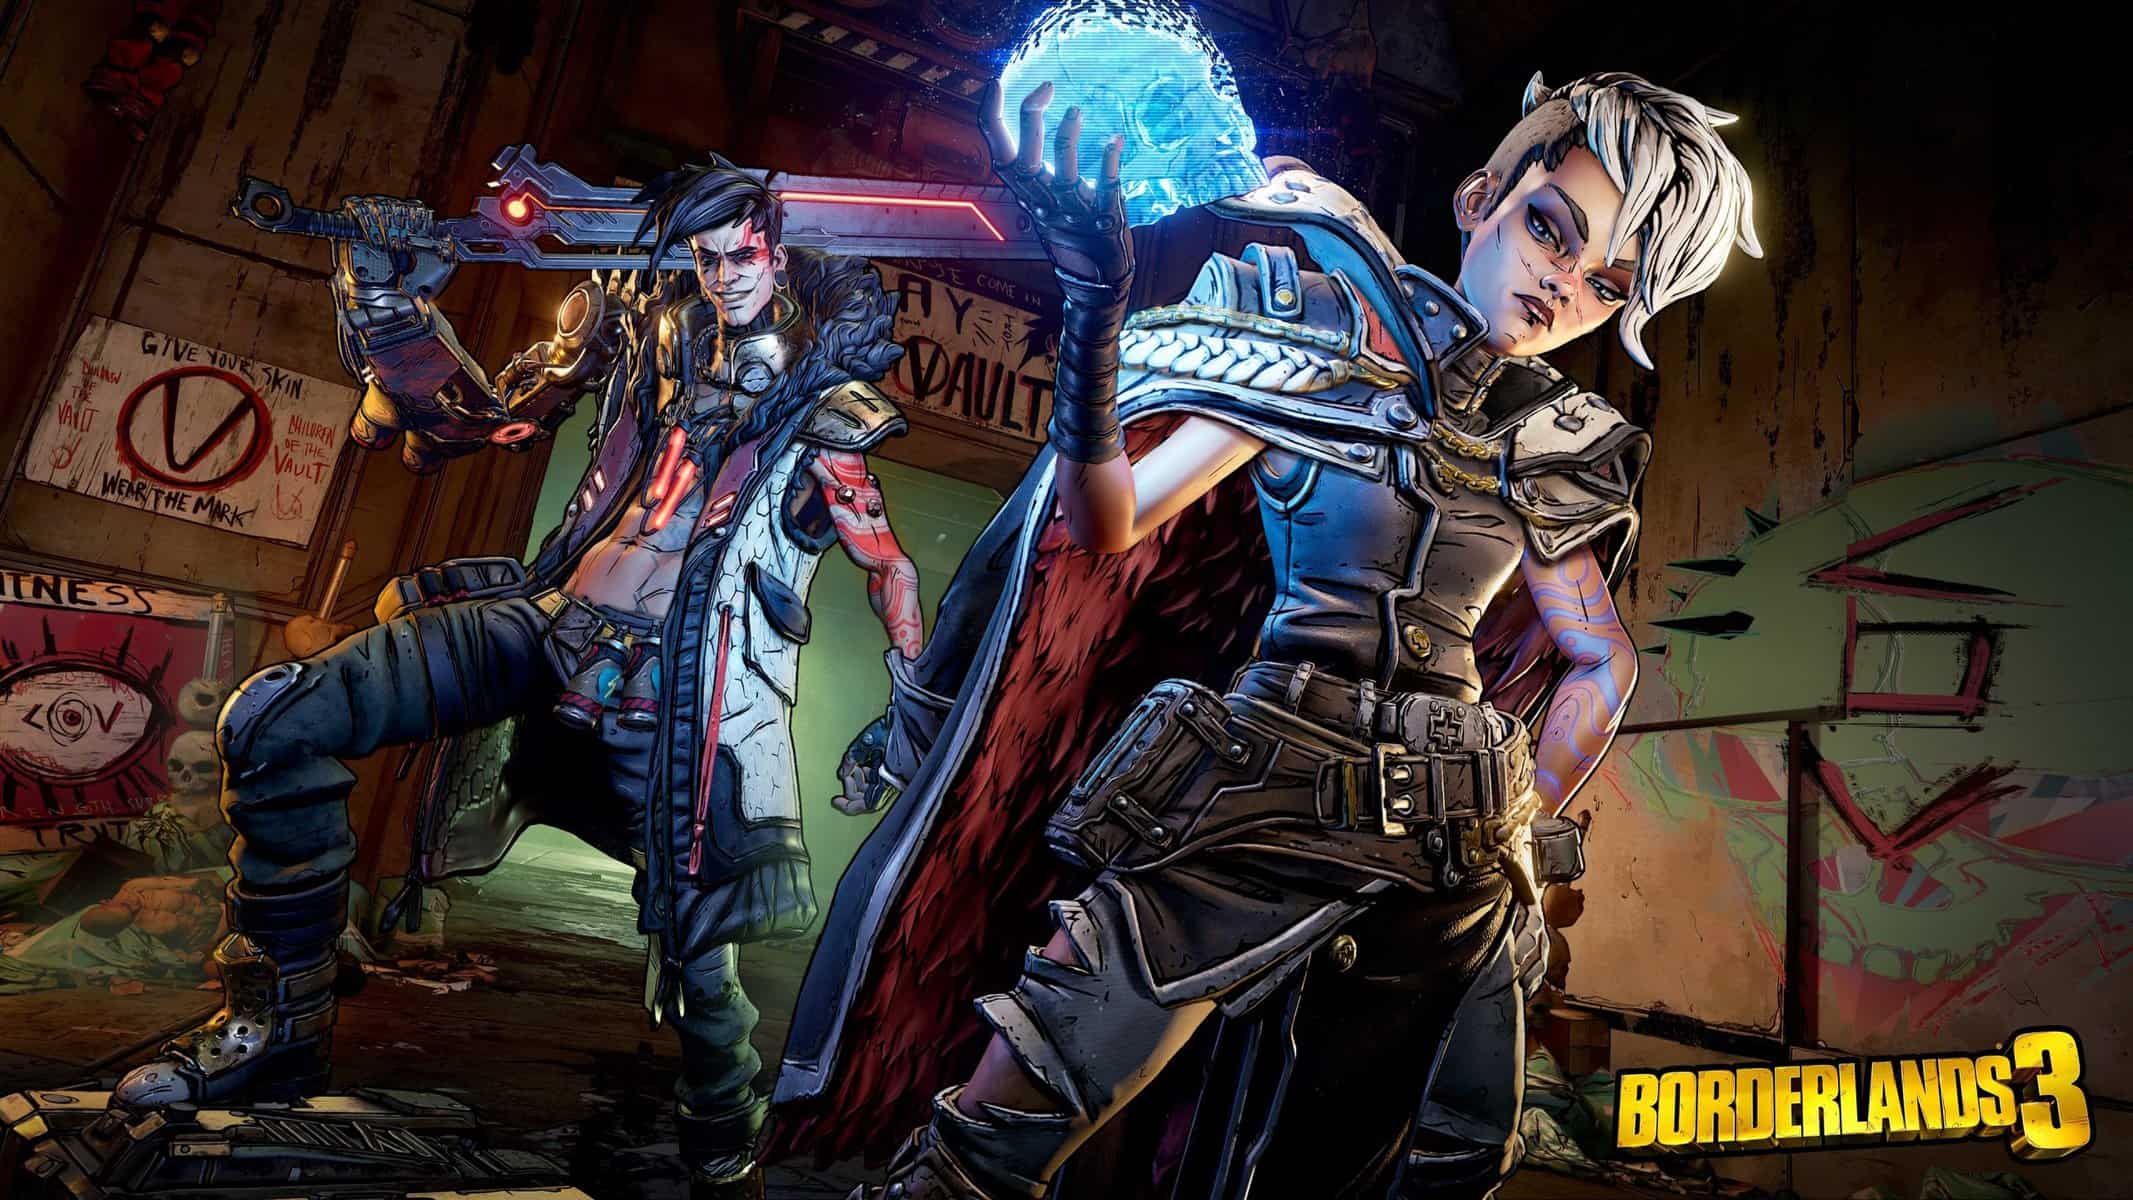 A new Borderlands spin-off is rumoured to be in the works